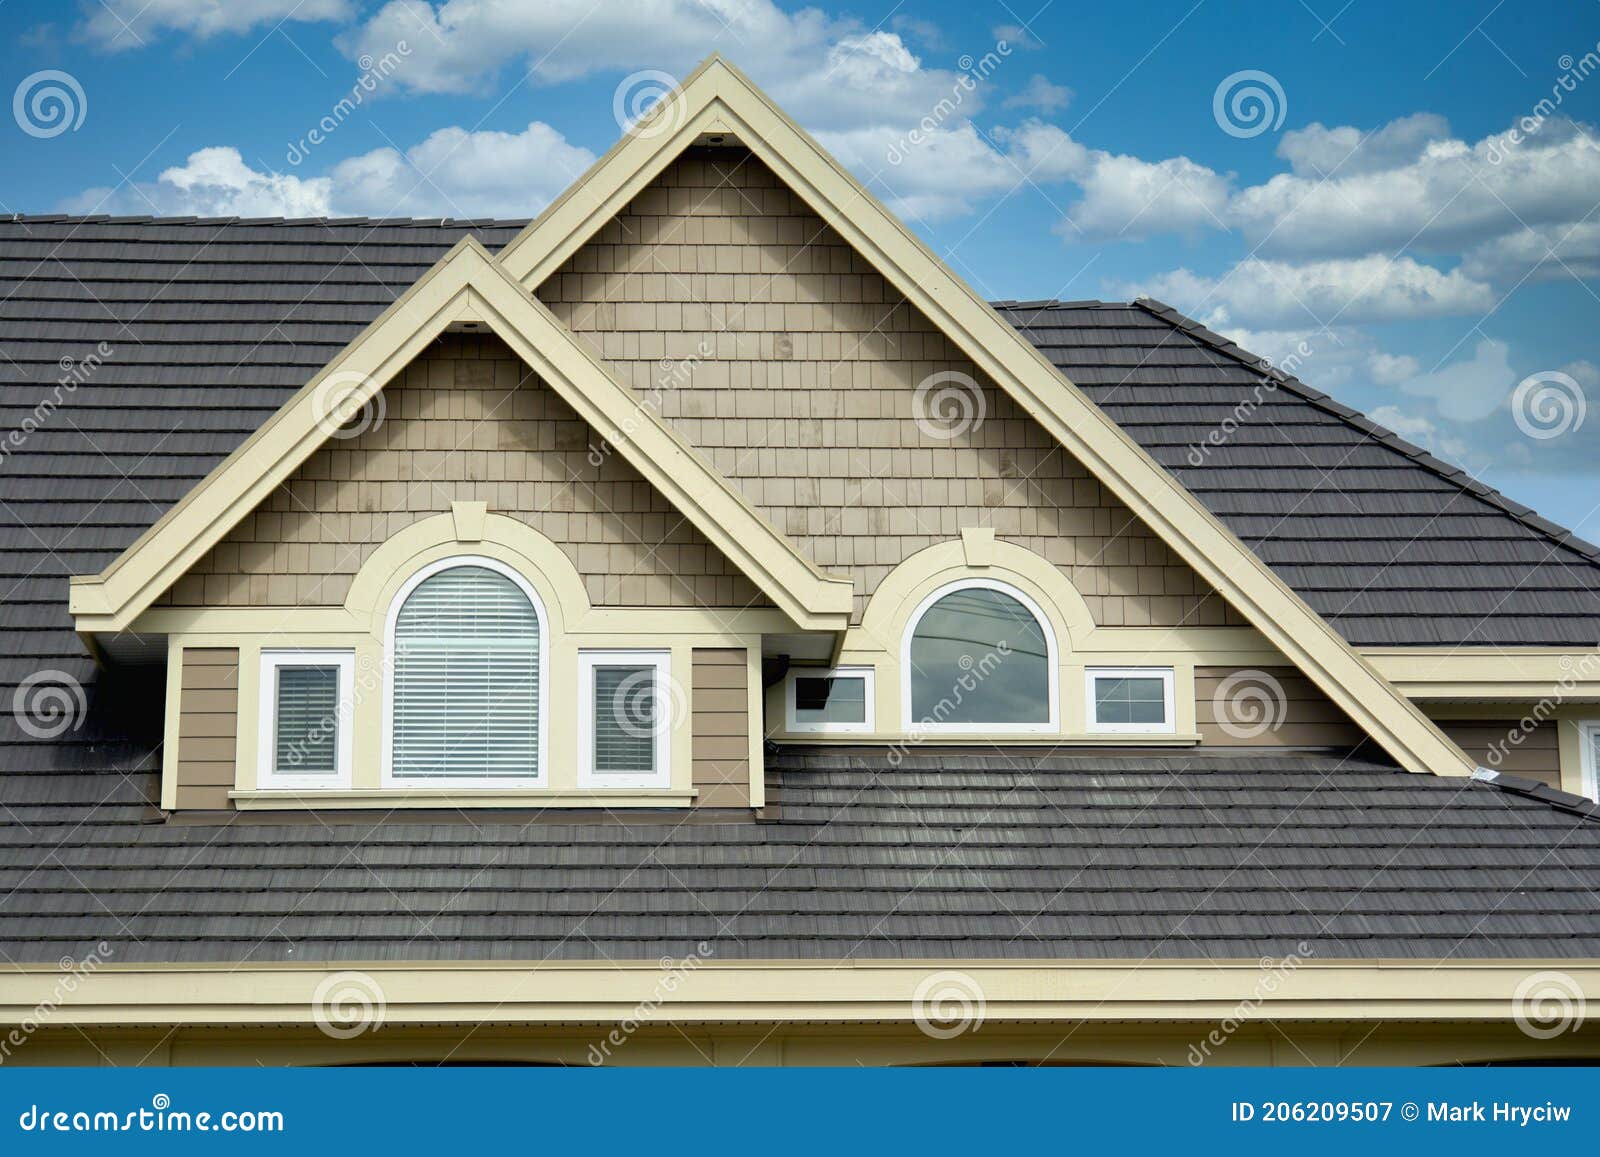 new exterior maison home house roof details clouds sky background